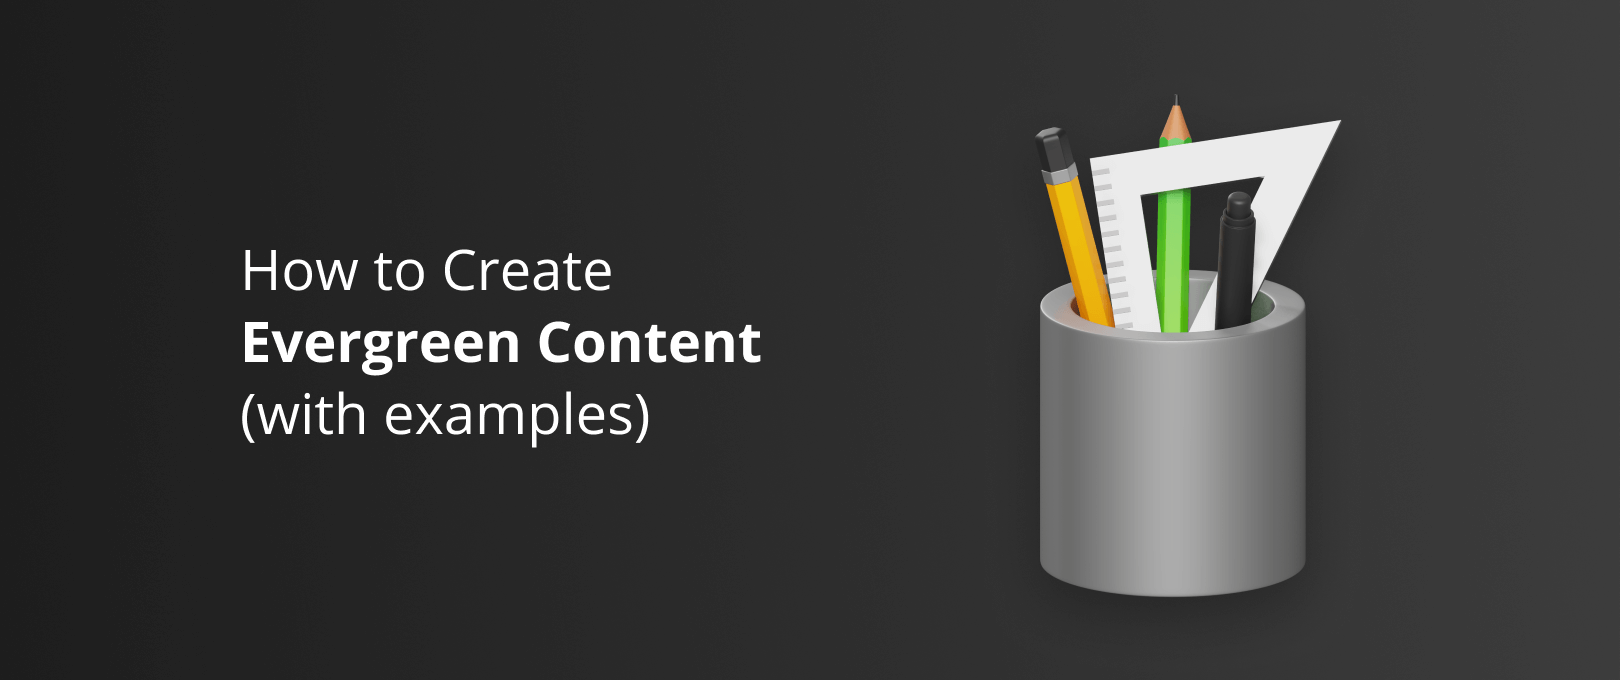 How to update evergreen content